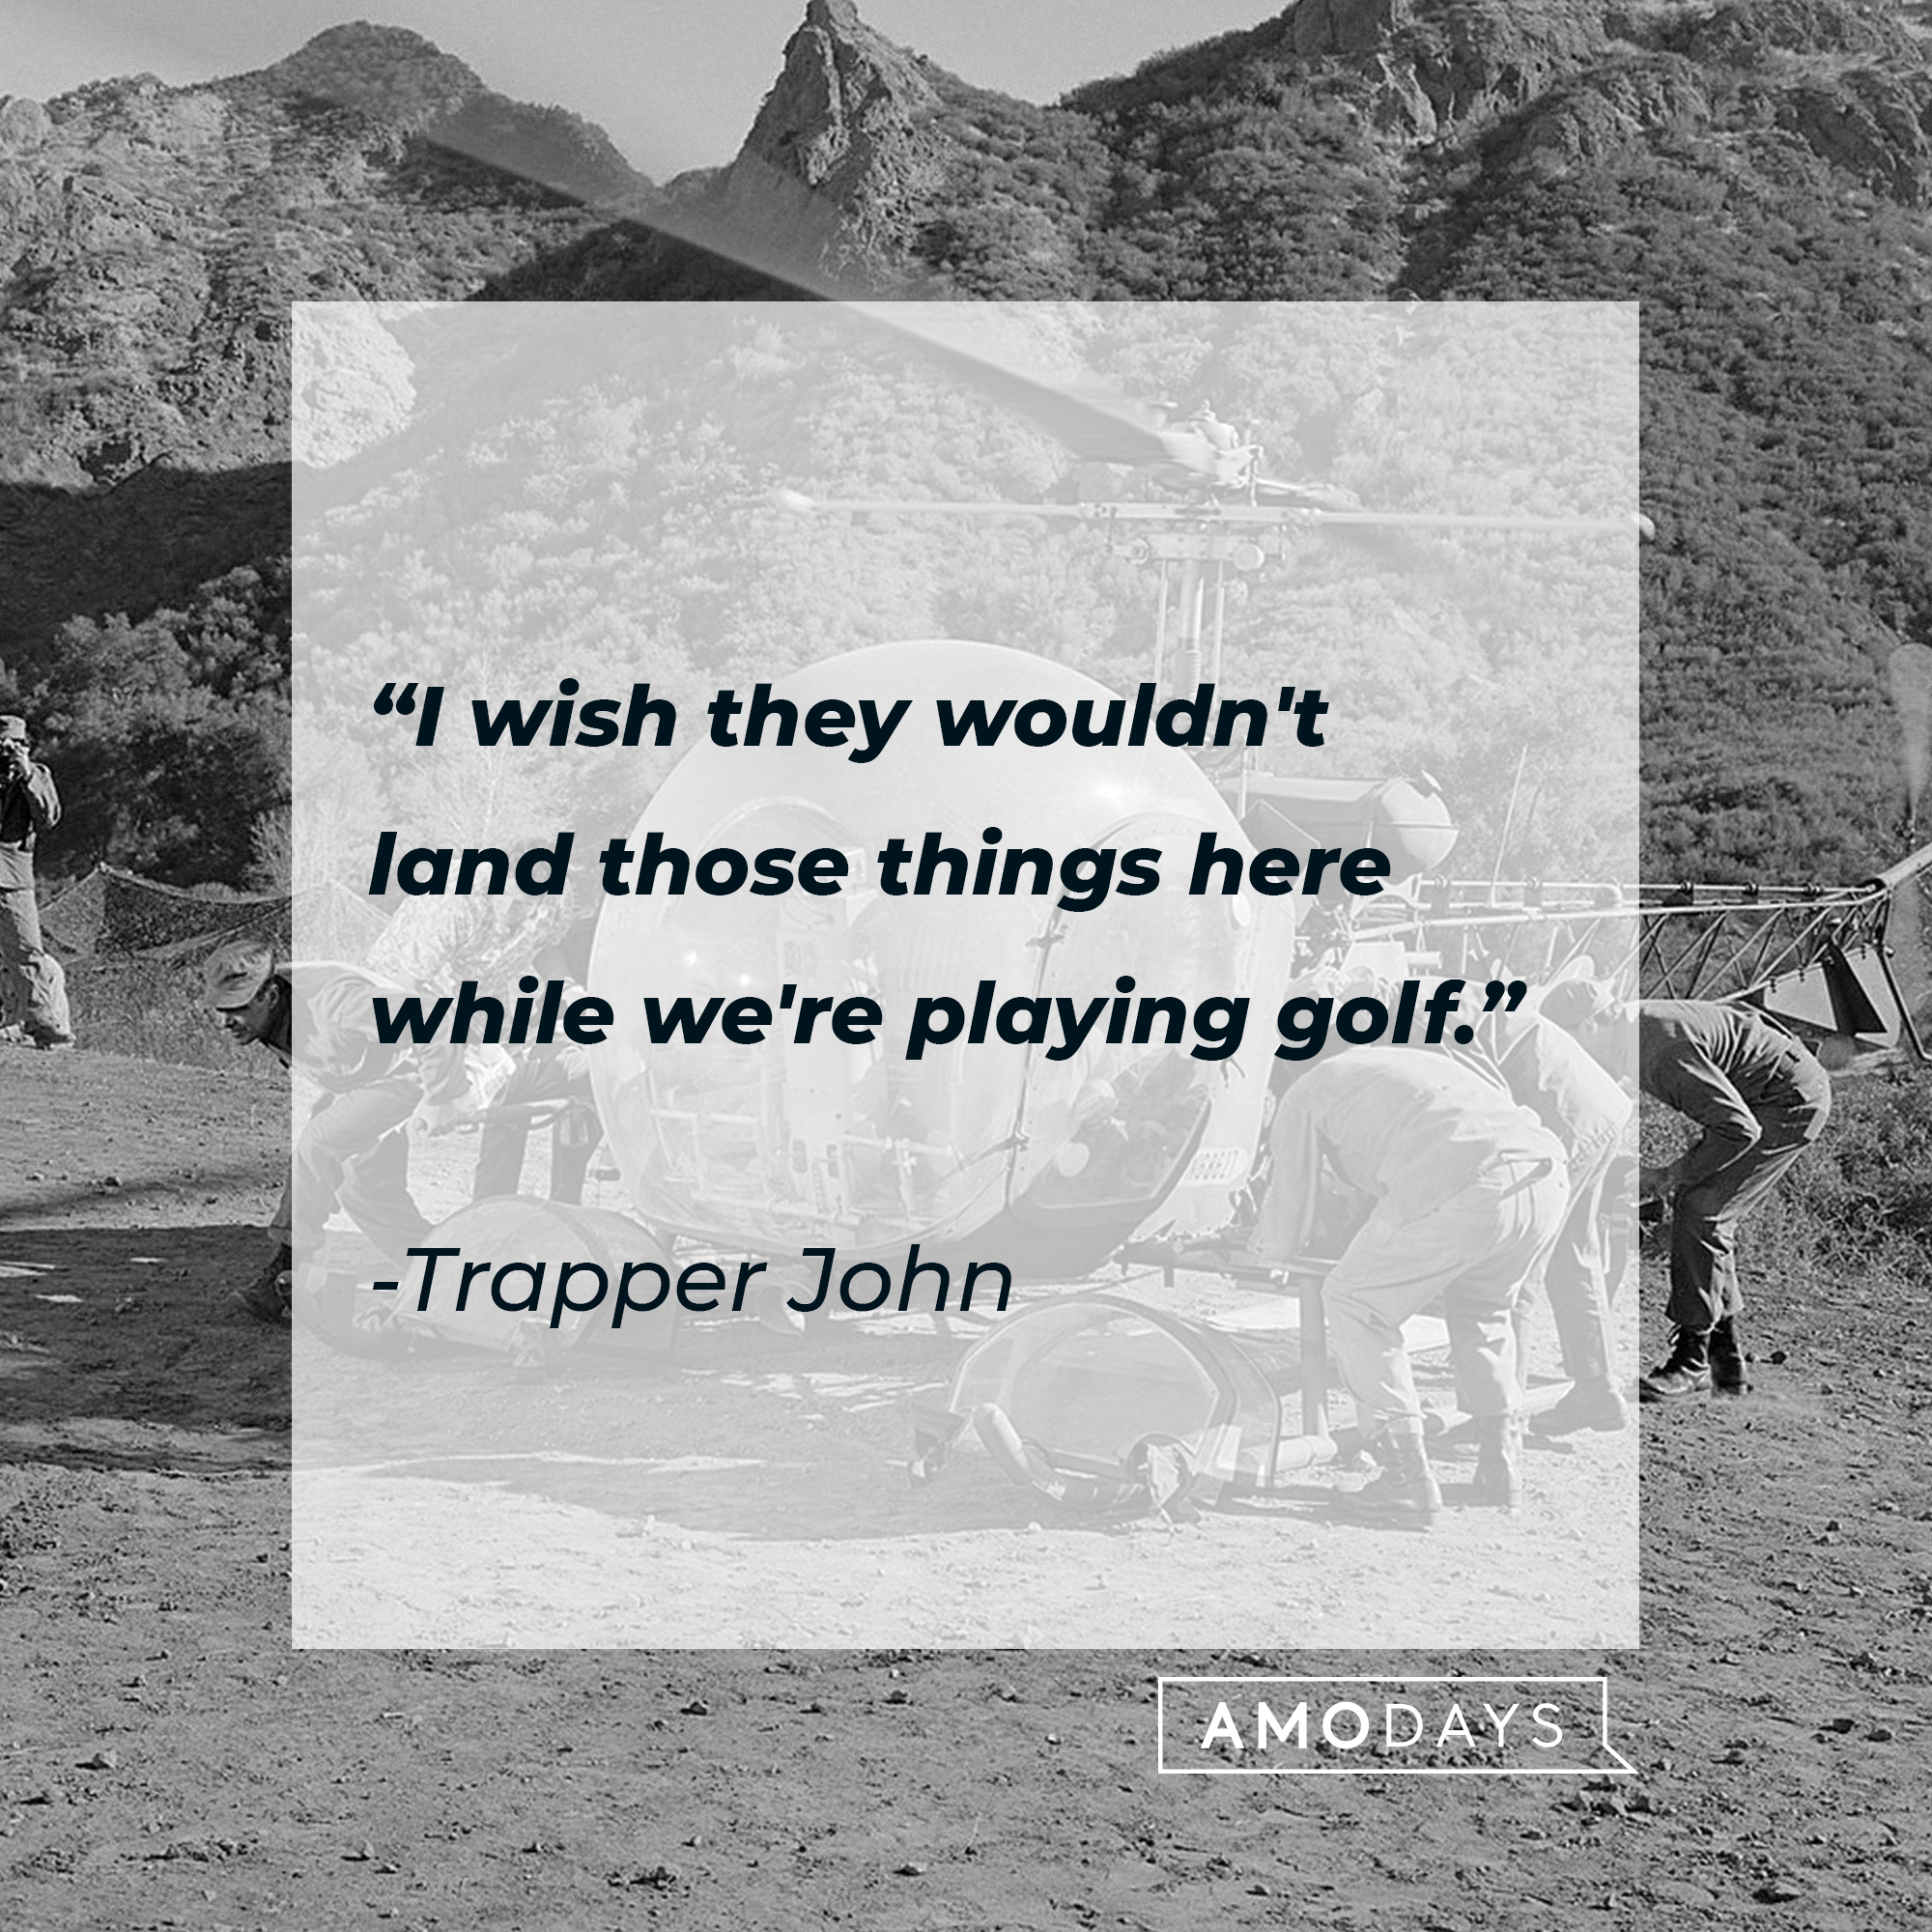 Trapper John's quote: "I wish they wouldn't land those things here while we're playing golf." | Source: Getty Images